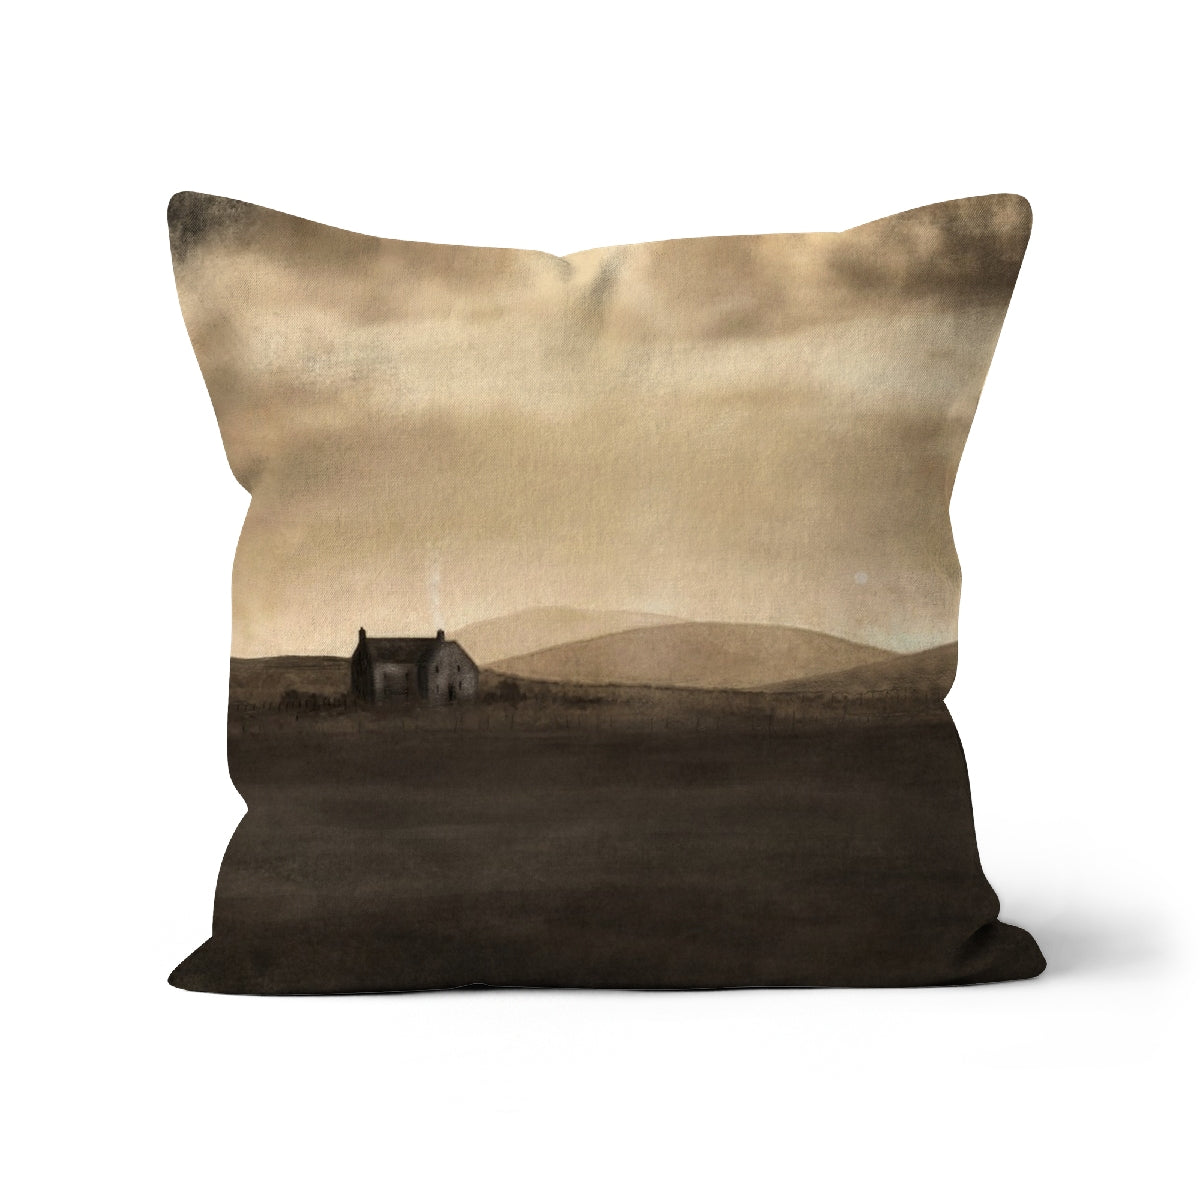 A Moonlit Croft Art Gifts Cushion-Cushions-Hebridean Islands Art Gallery-Faux Suede-18"x18"-Paintings, Prints, Homeware, Art Gifts From Scotland By Scottish Artist Kevin Hunter